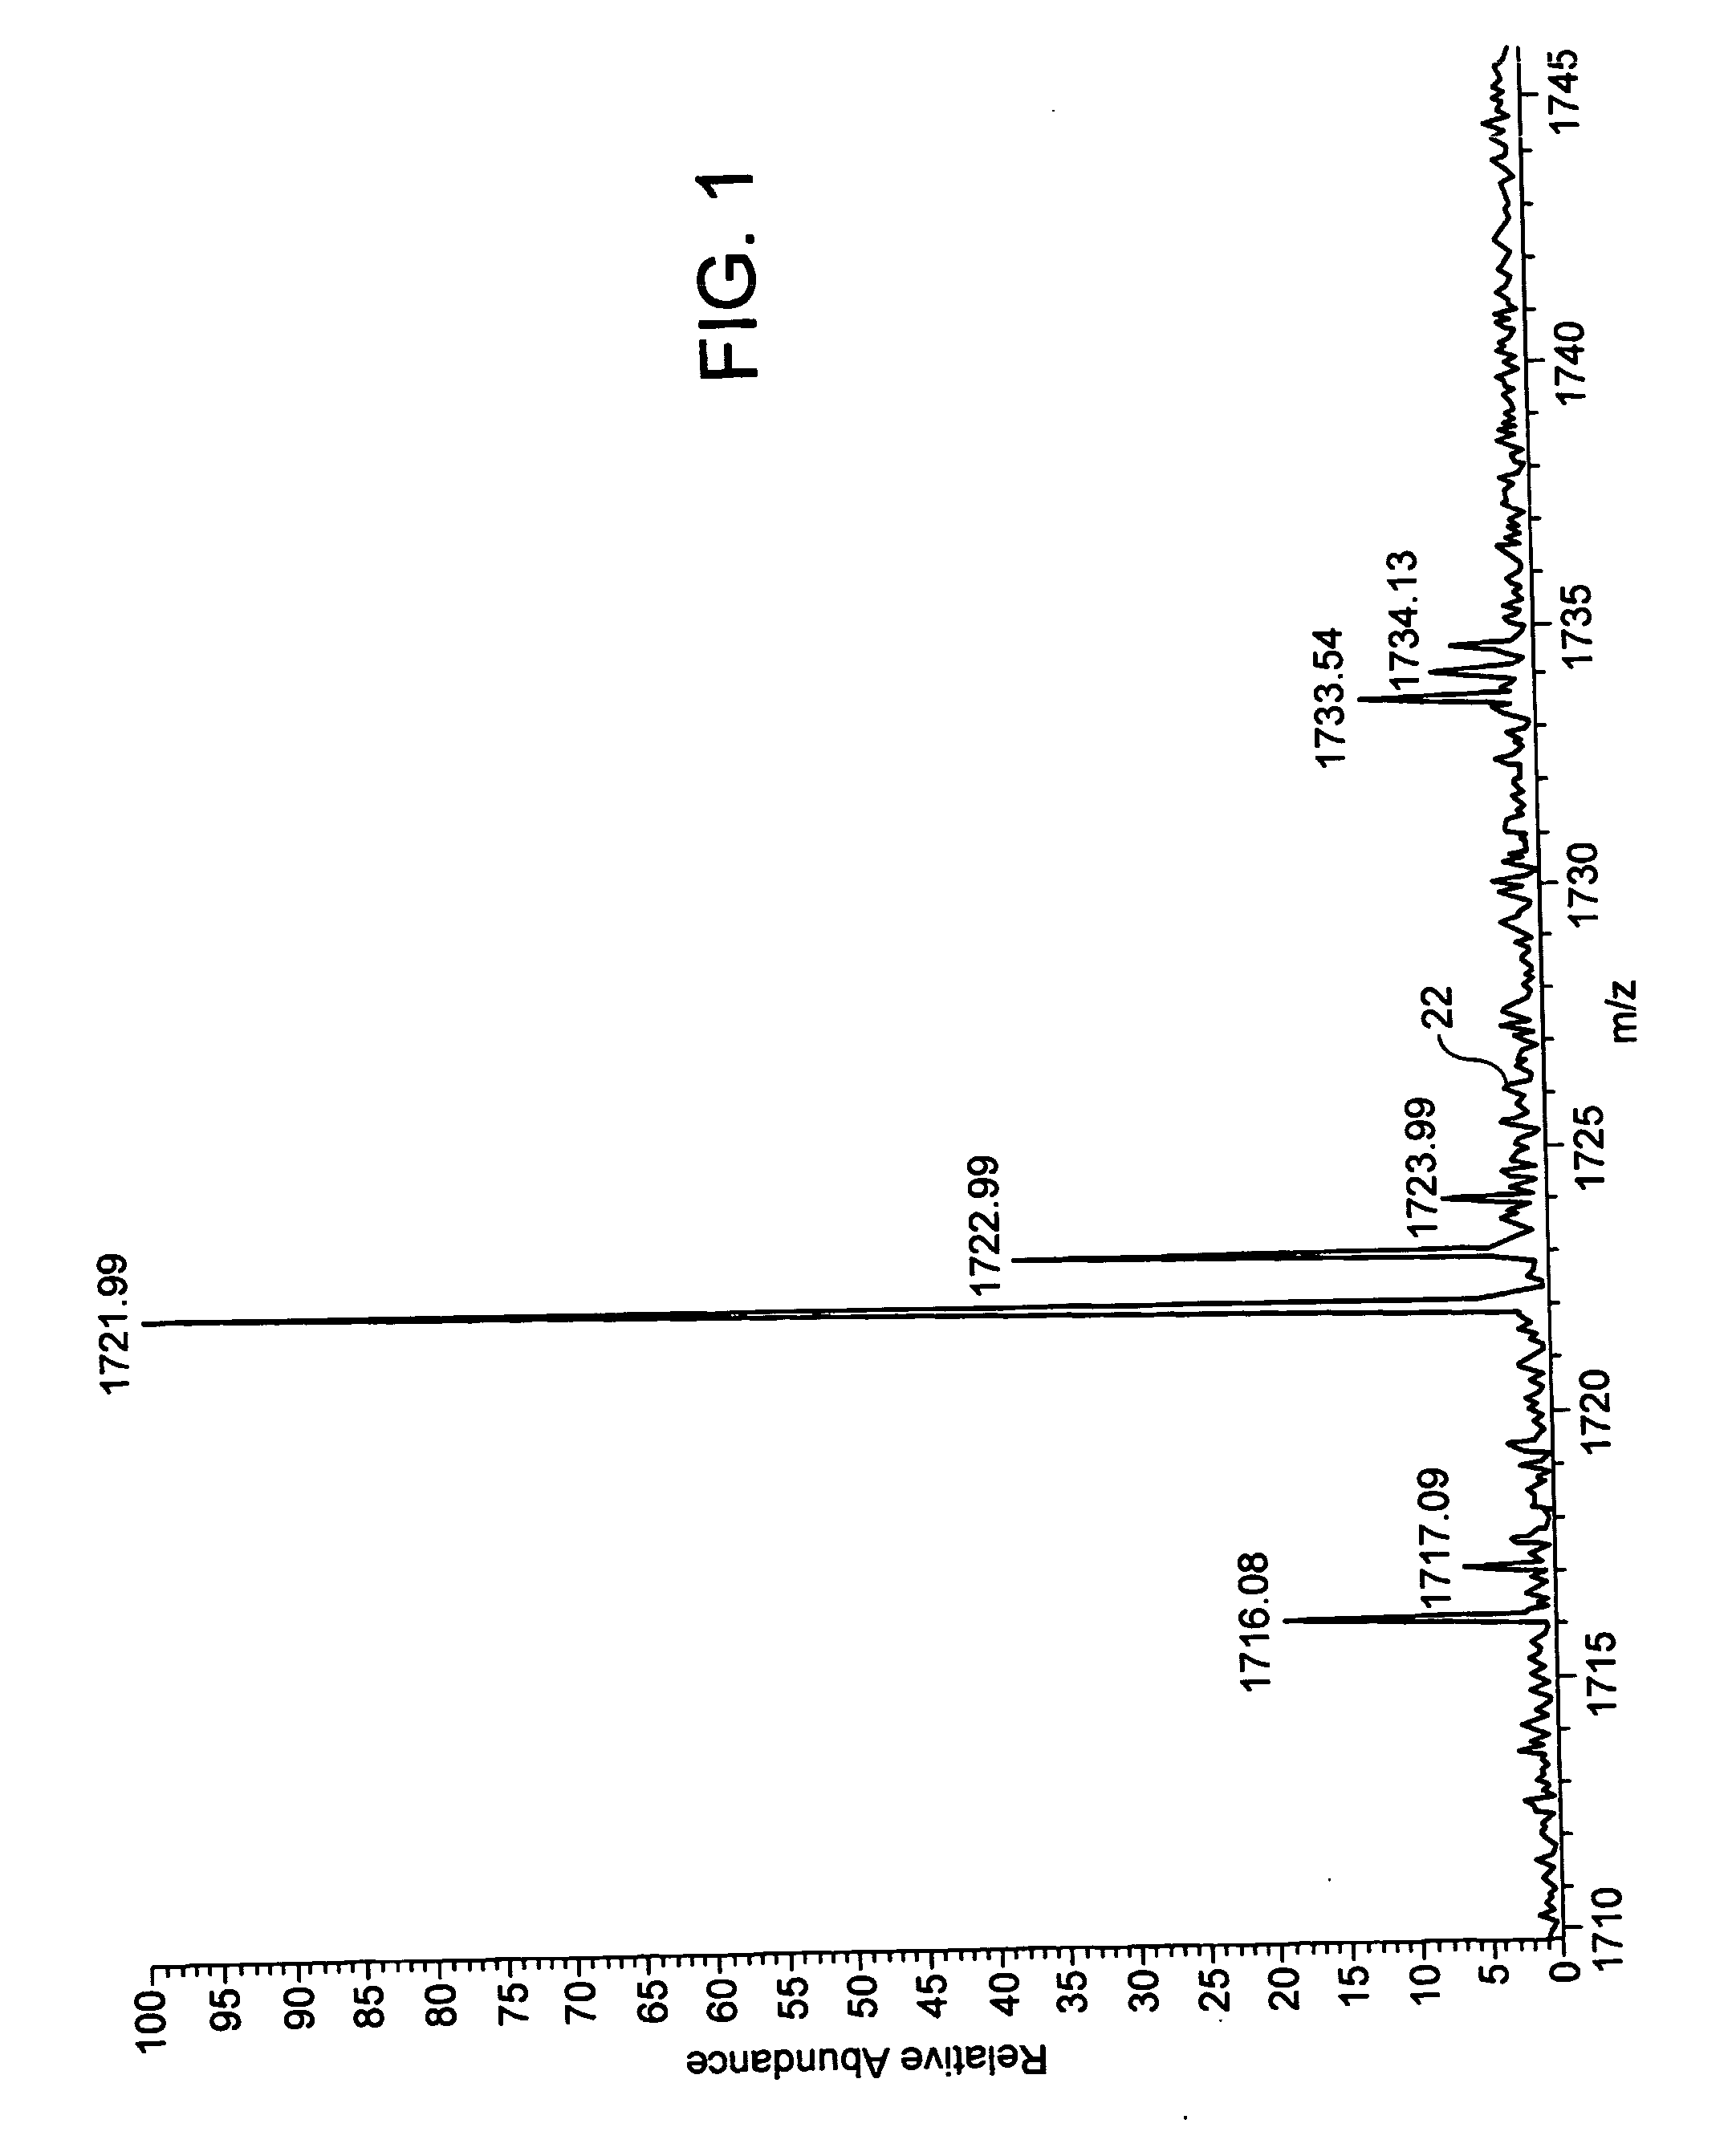 Method of processing and storing mass spectrometry data